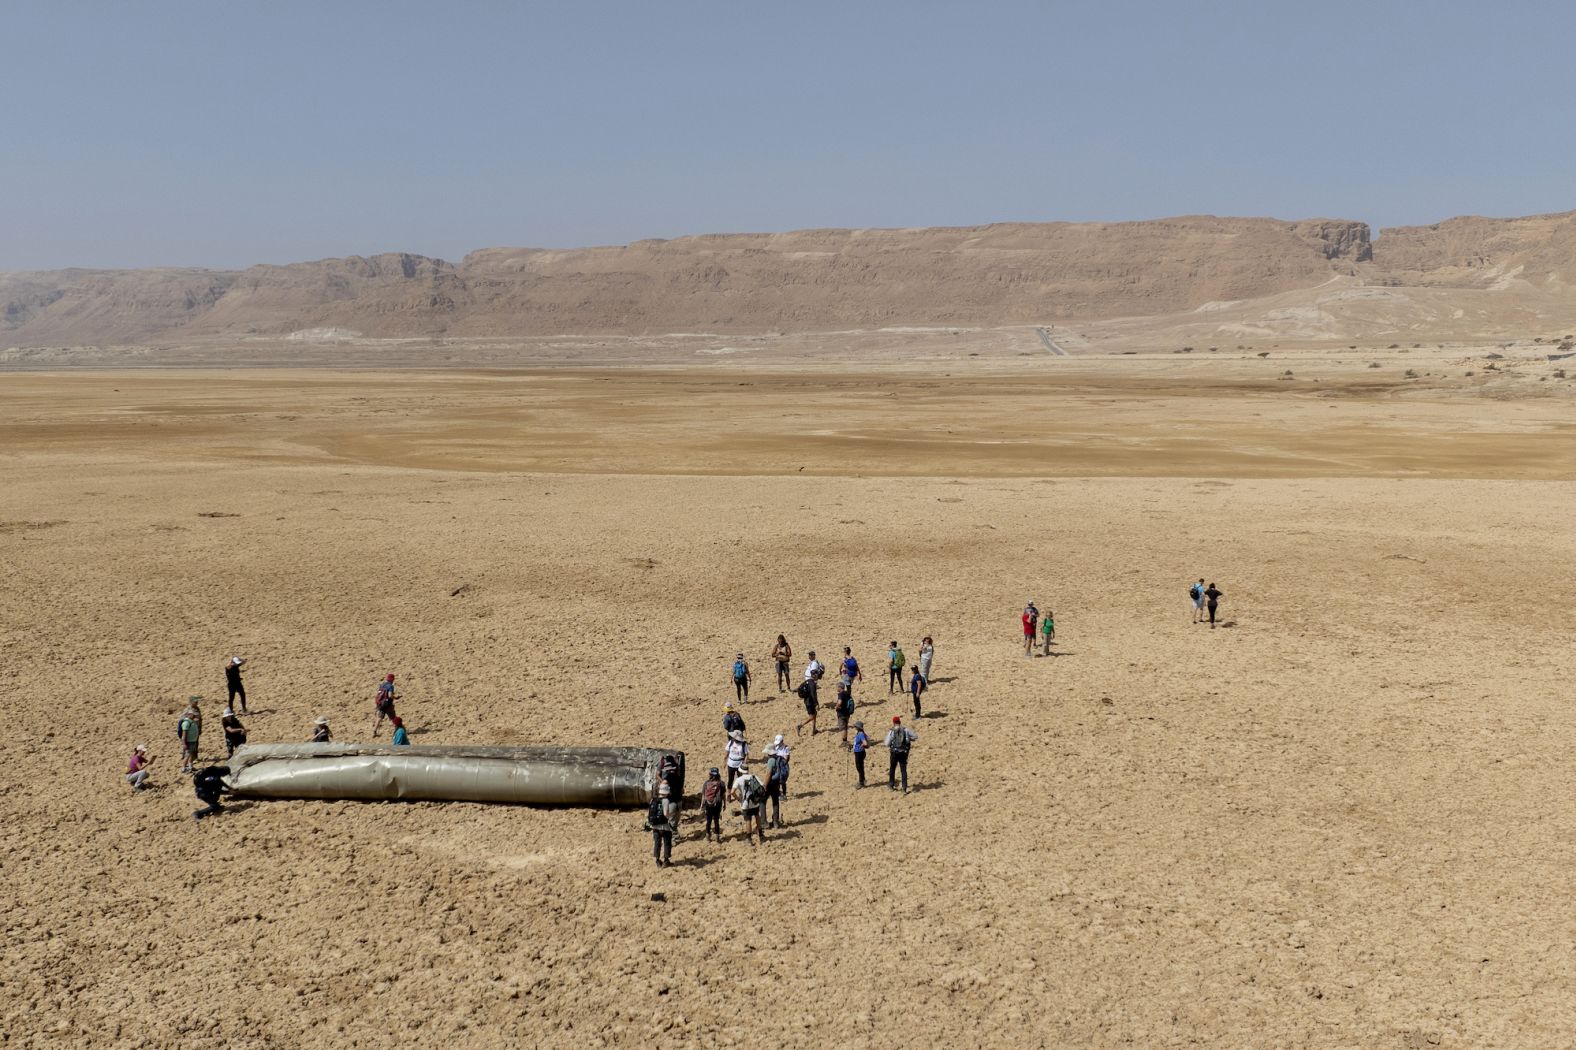 People gather around a piece of a ballistic missile near the Dead Sea in Israel on Saturday, April 20. Almost all the ballistic missiles and drones Iran launched at Israel in <a href="index.php?page=&url=https%3A%2F%2Fwww.cnn.com%2F2024%2F04%2F14%2Fmiddleeast%2Fisrael-air-missile-defense-iran-attack-intl-hnk-ml%2Findex.html" target="_blank">an unprecedented attack</a> this month were intercepted and failed to meet their mark, according to Israeli and American officials. The attack followed an Israeli strike on an Iranian diplomatic complex in Syria.